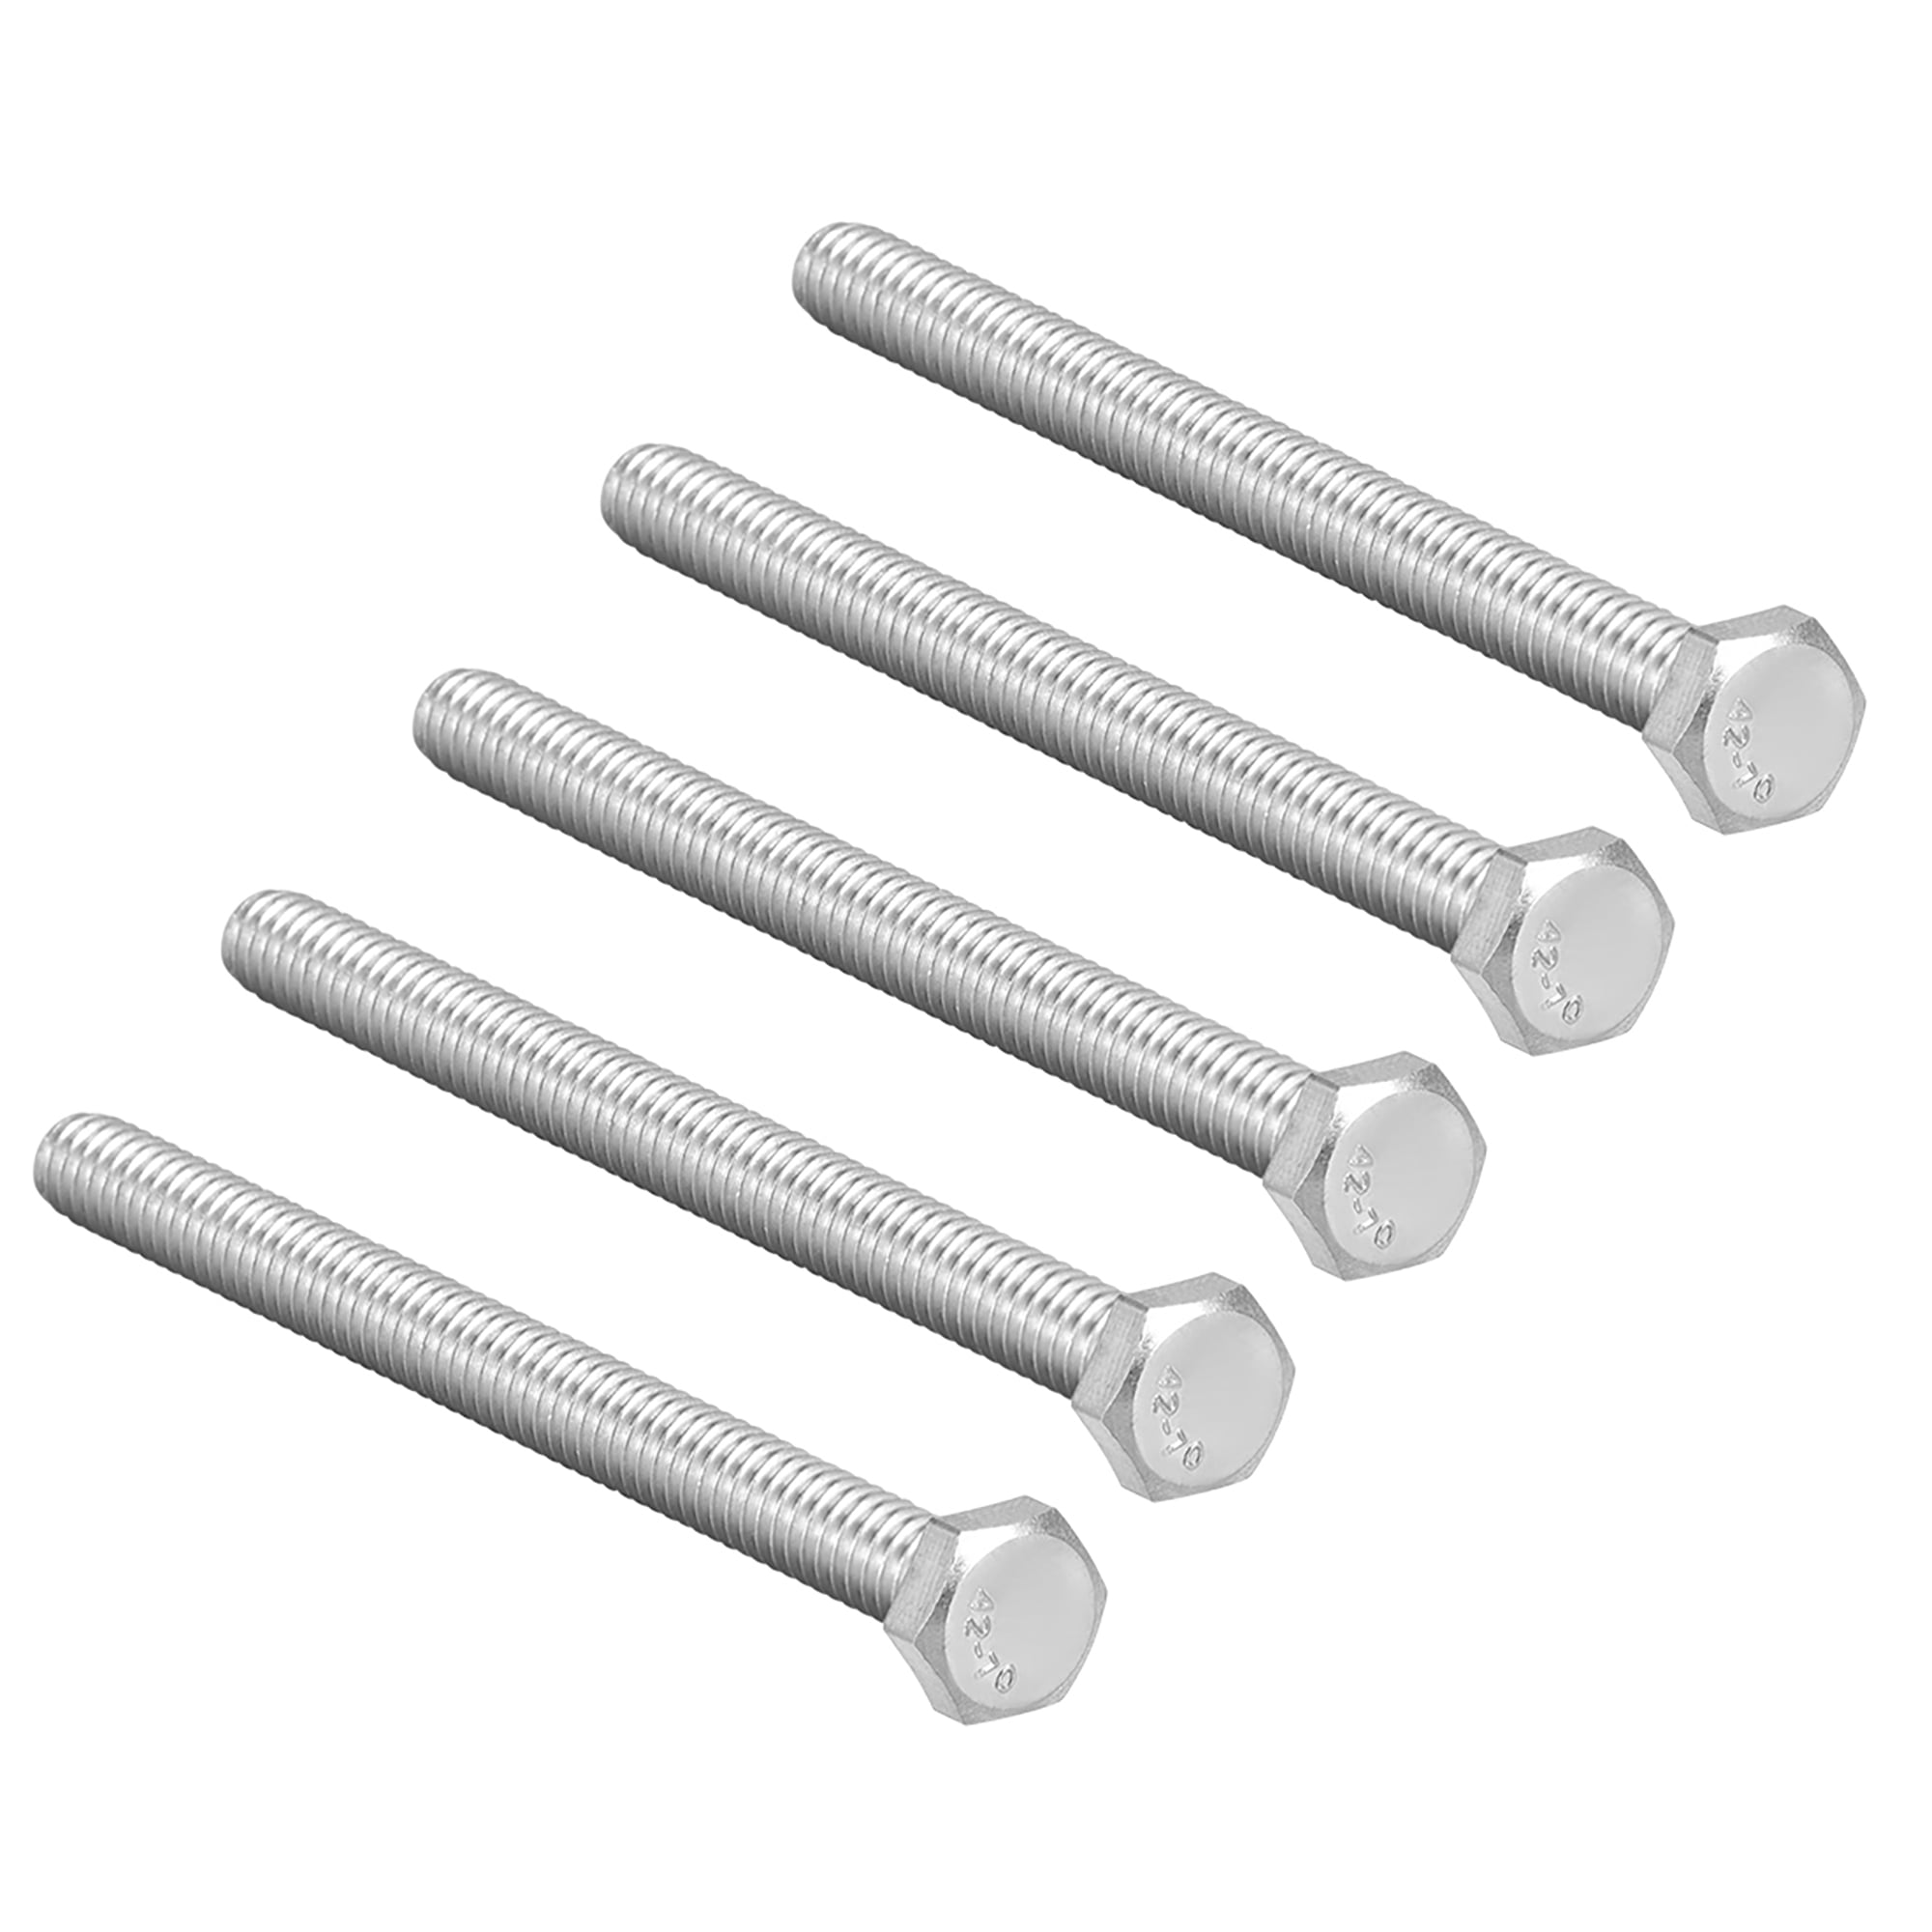 M5 A2 304 Stainless Steel Nuts and Bolts with Washers Pack of 6, 12 or 24 